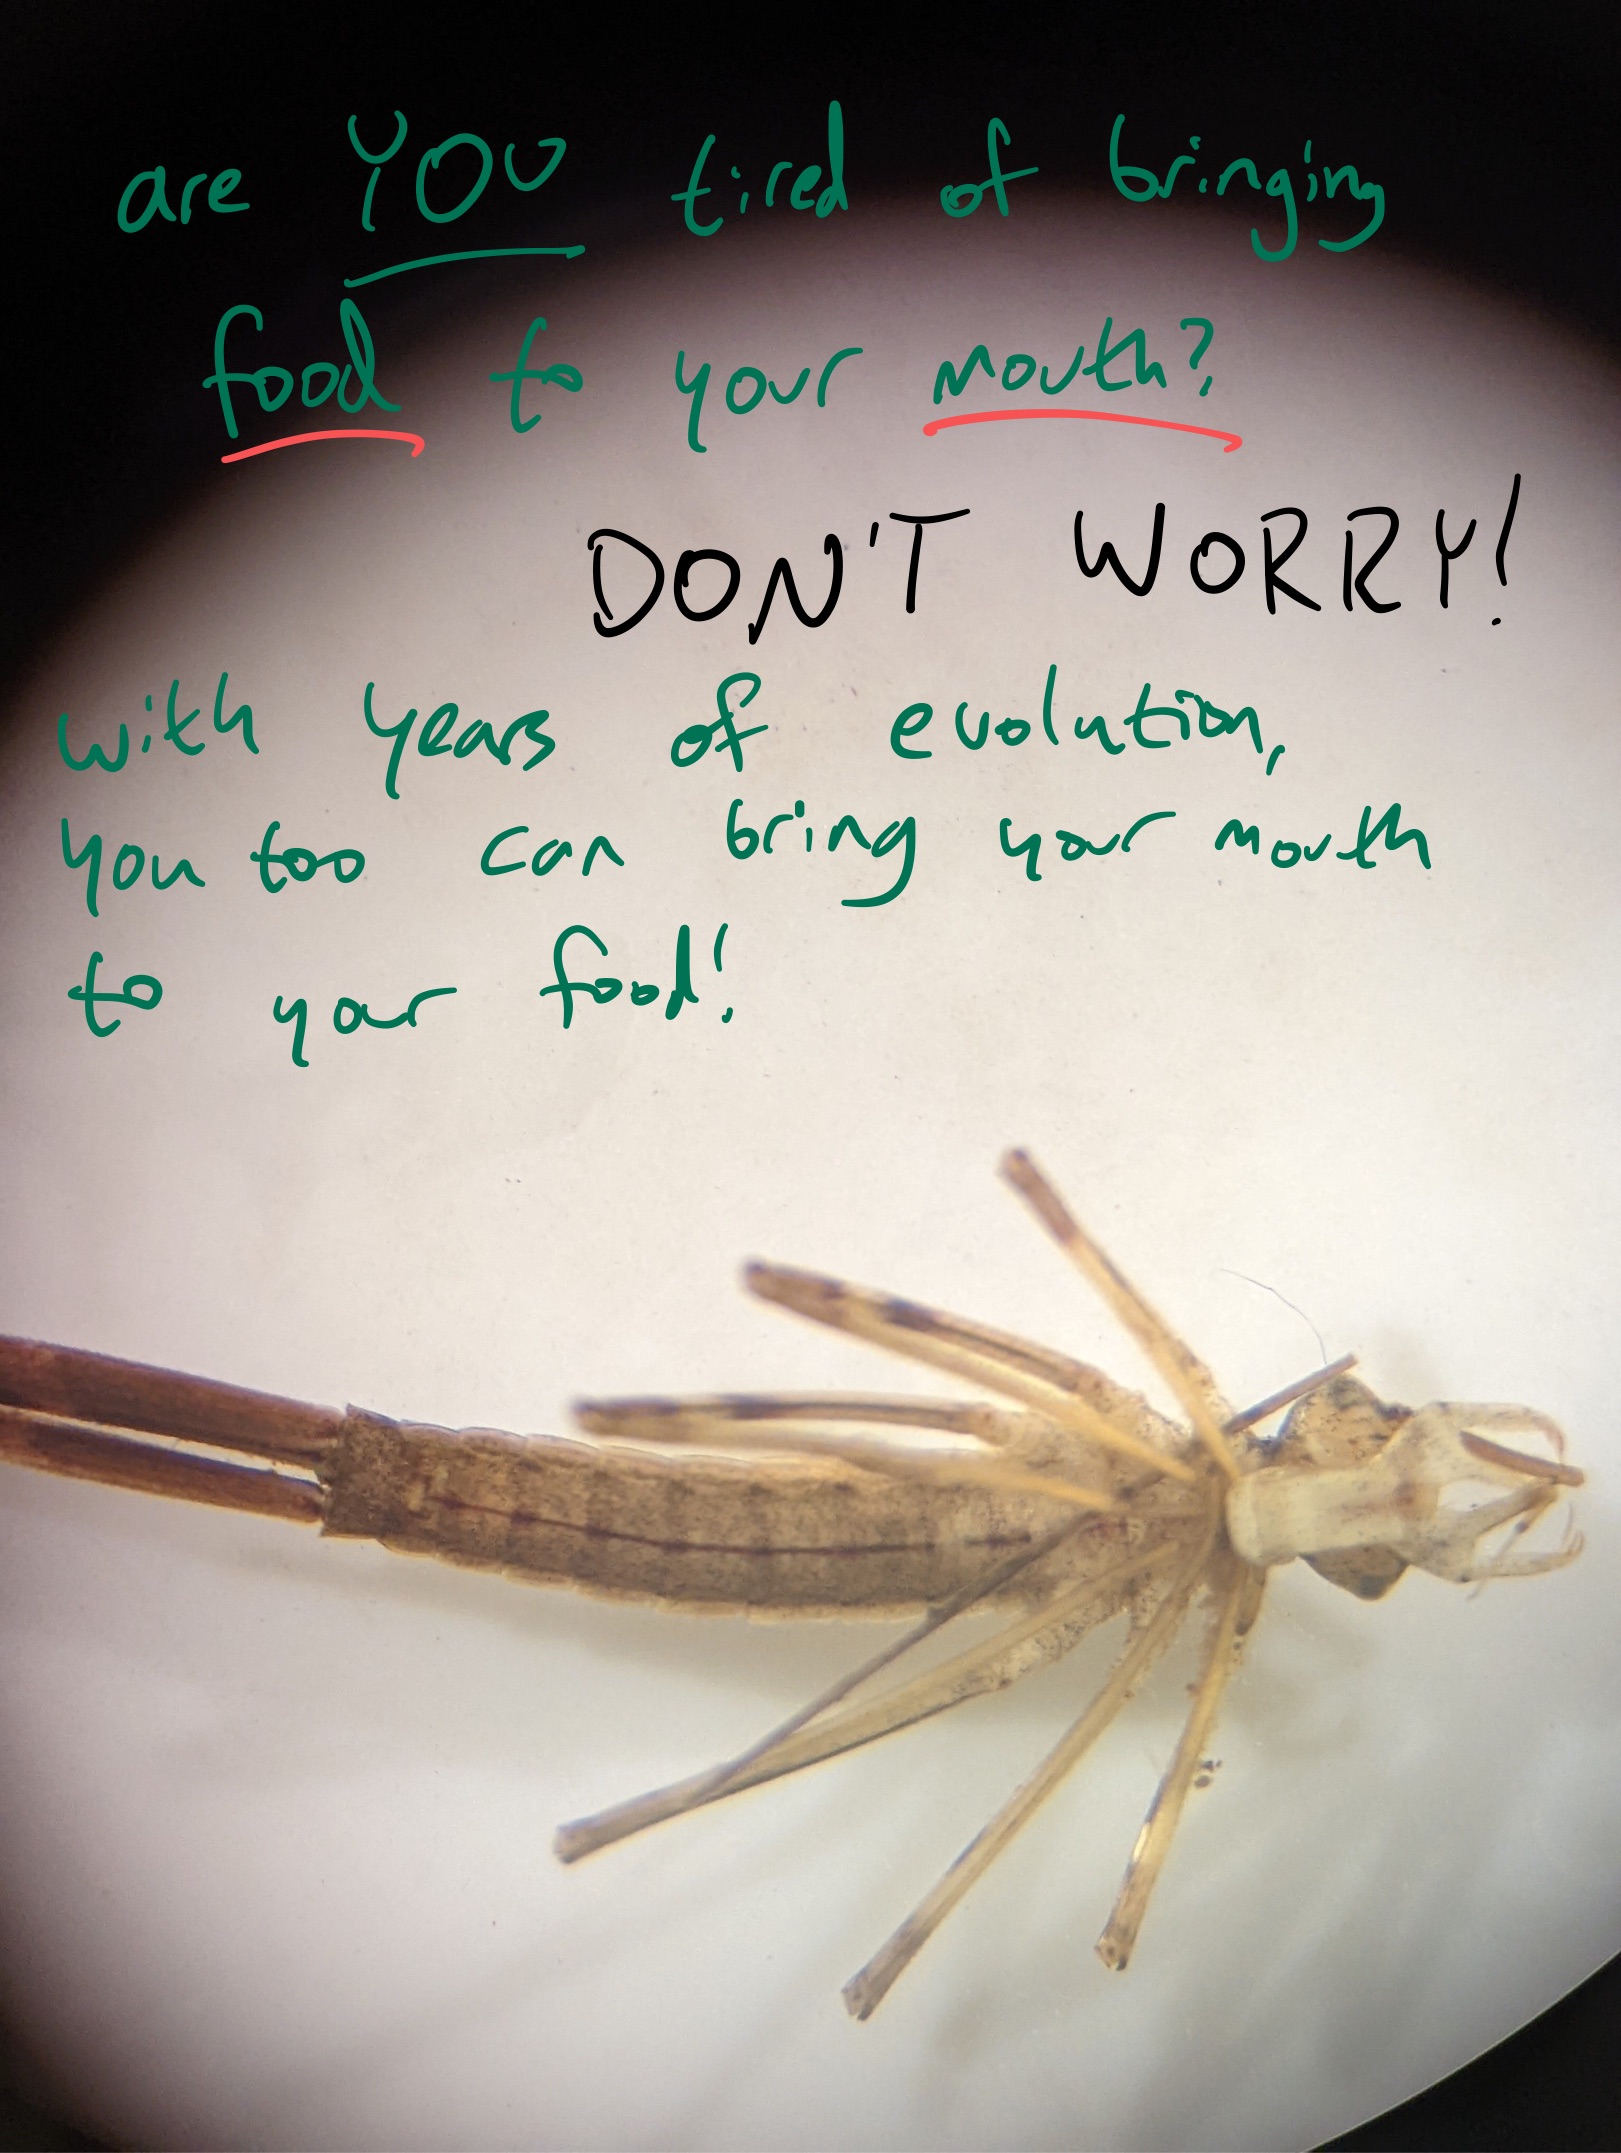 A picture of a damselfly nymph on its back in a petri dish as seen through a dissecting scope. <br>
    Handwritten text reads 'Are <u>YOU</u> tired of bringing <u>food</u> to your <u>mouth</u>? DON'T WORRY! With years of evolution, you too can bring your mouth to your food!